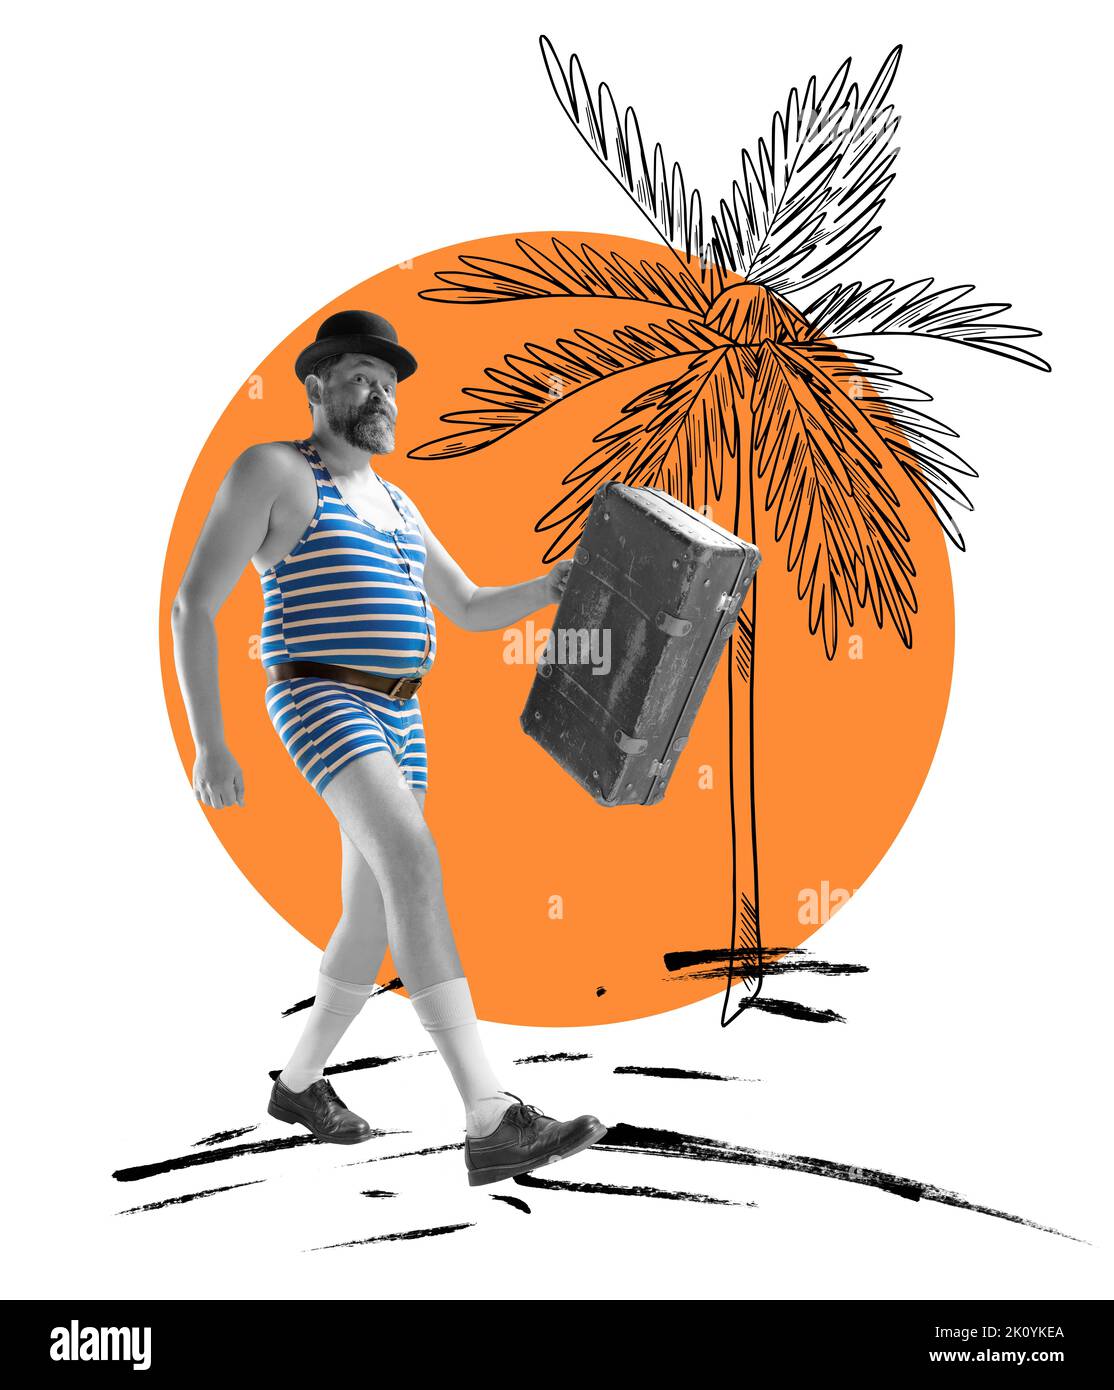 Contemporary art collage. Cheerful man in striped vintage swimming suit and suitcase walking on beach near palms Stock Photo